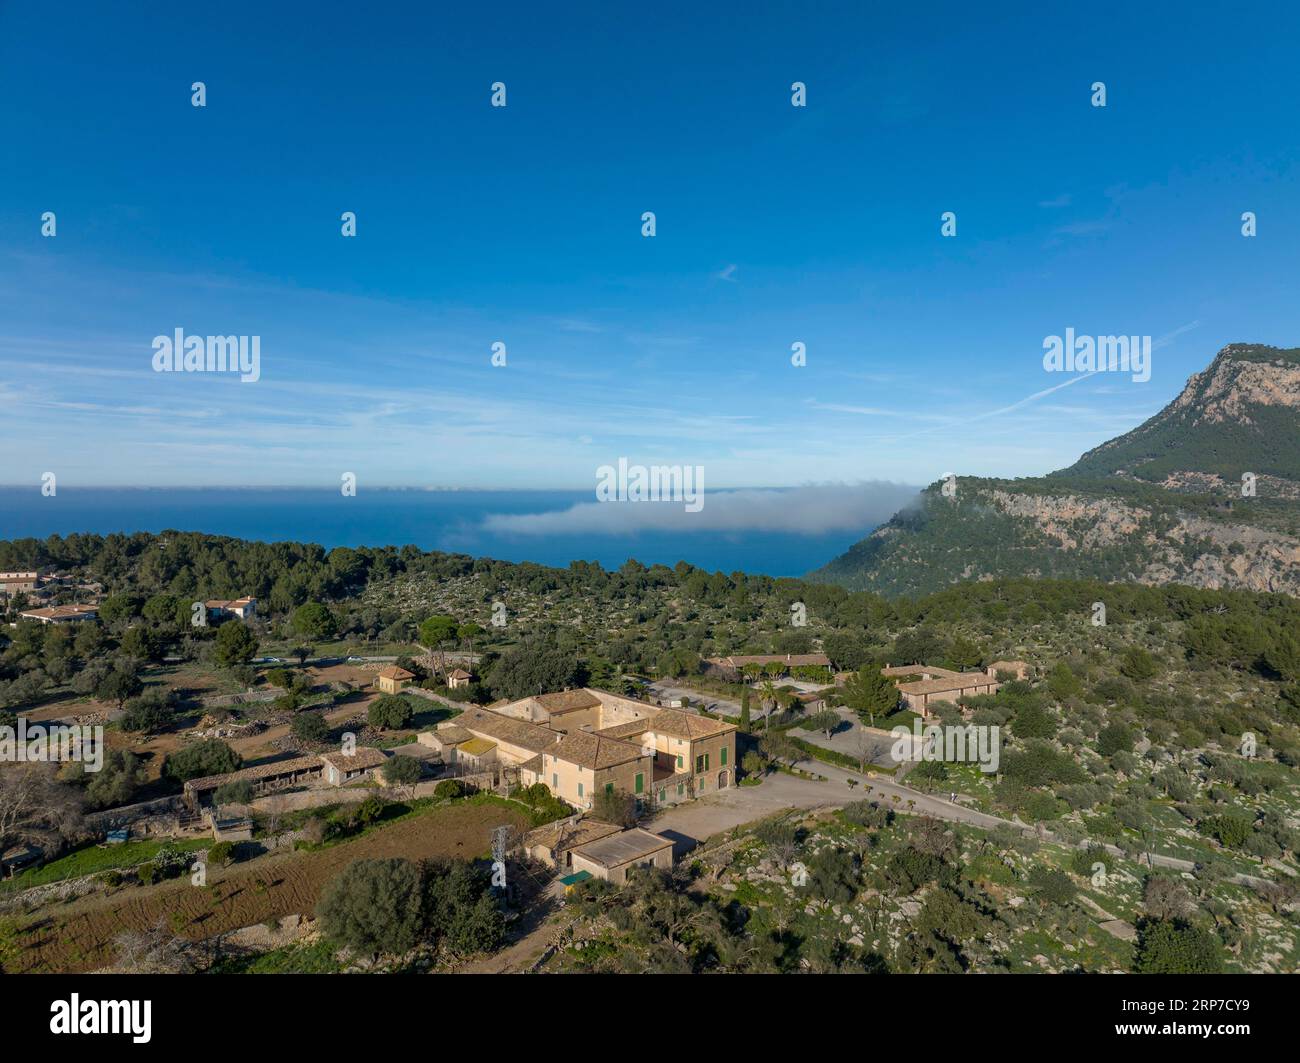 Aerial view, agricultural property, Valldemossa, Majorca, Balearic Islands, Spain Stock Photo